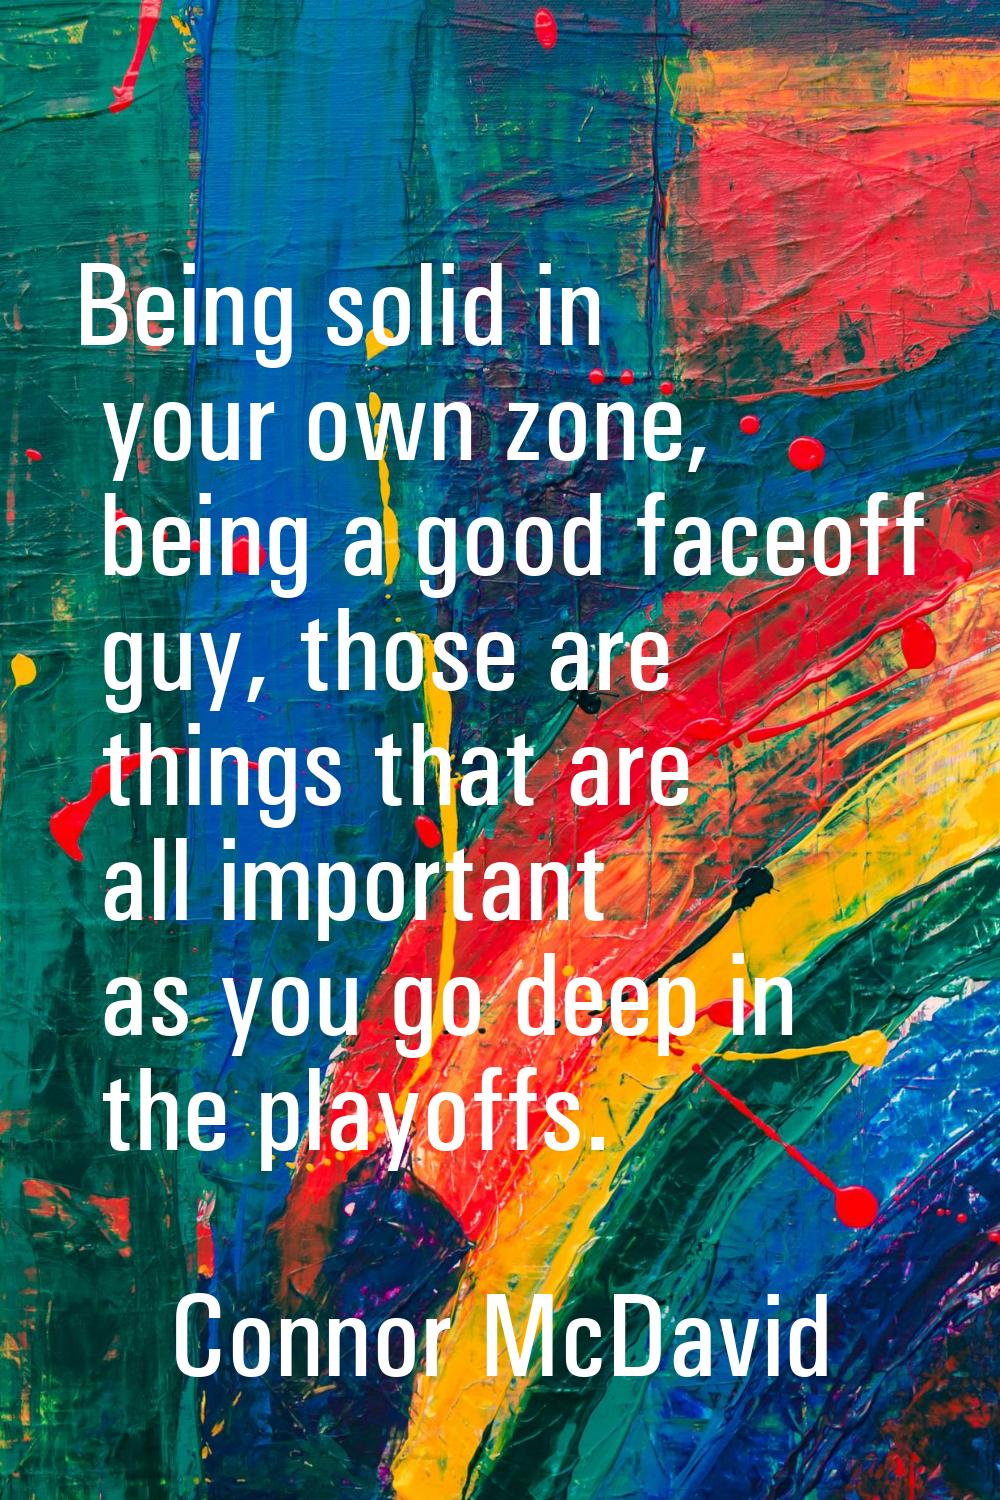 Being solid in your own zone, being a good faceoff guy, those are things that are all important as 